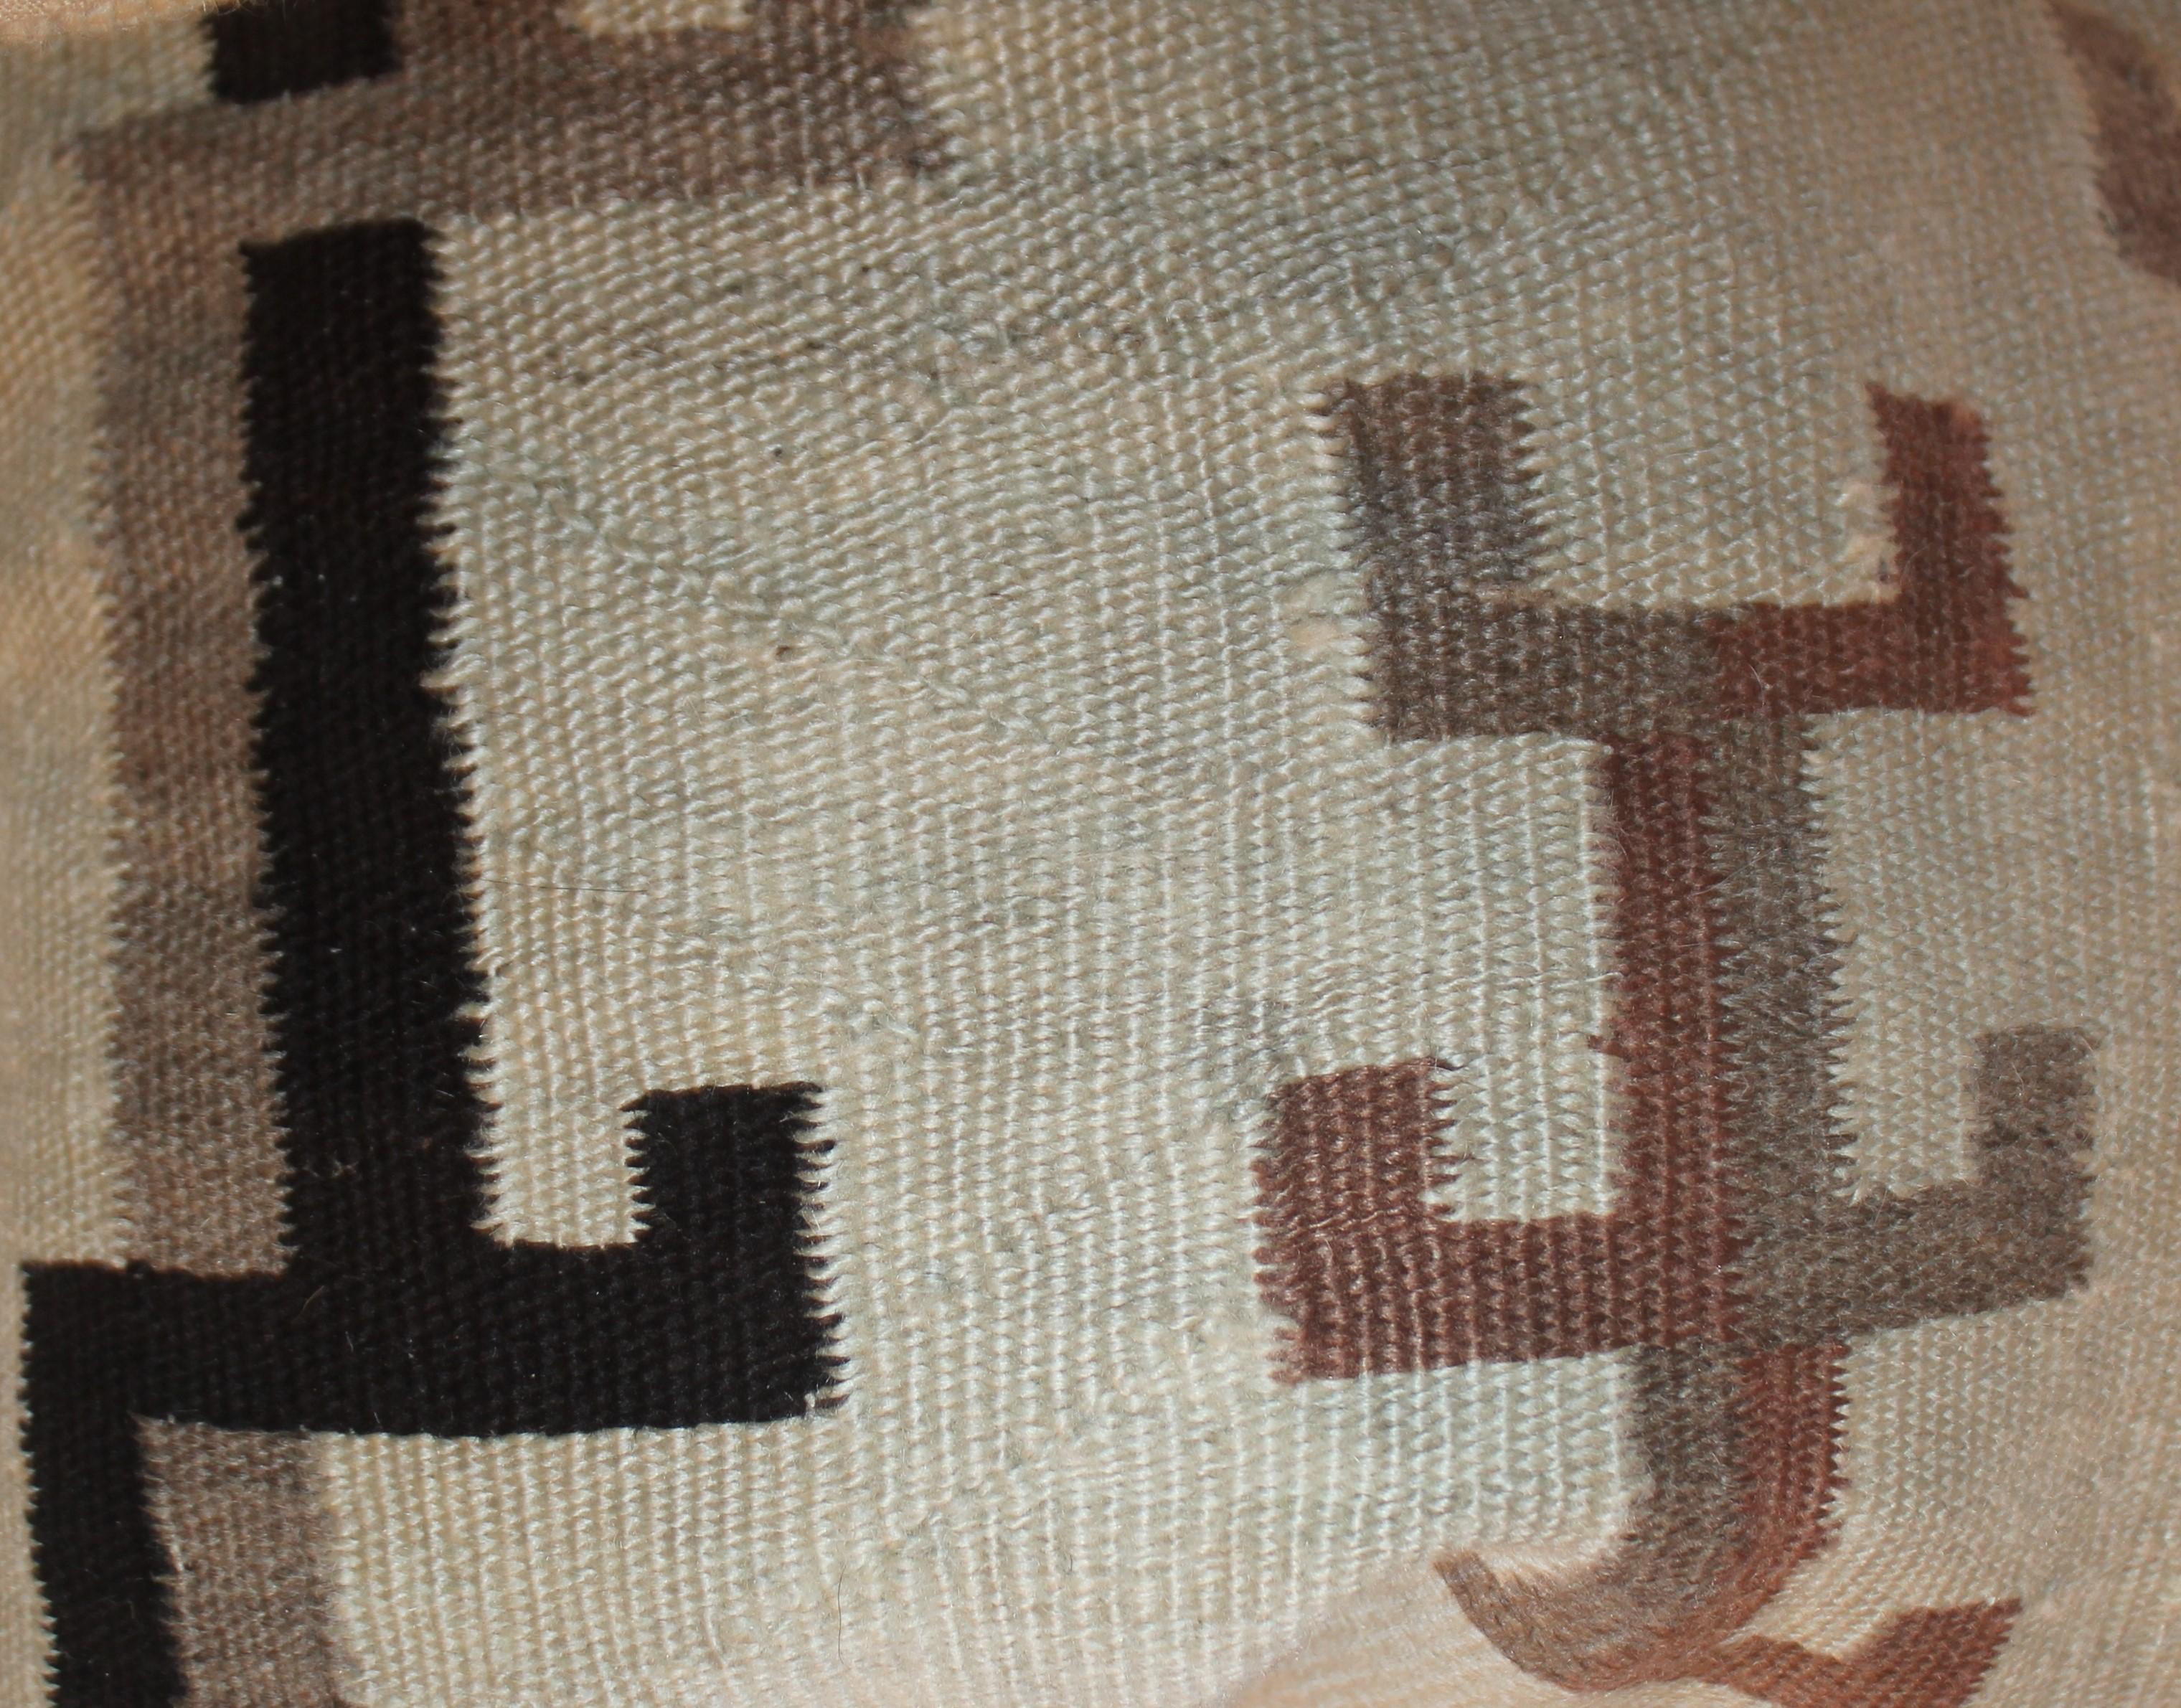 American Collection of Three Navajo Indian Weaving Pillows